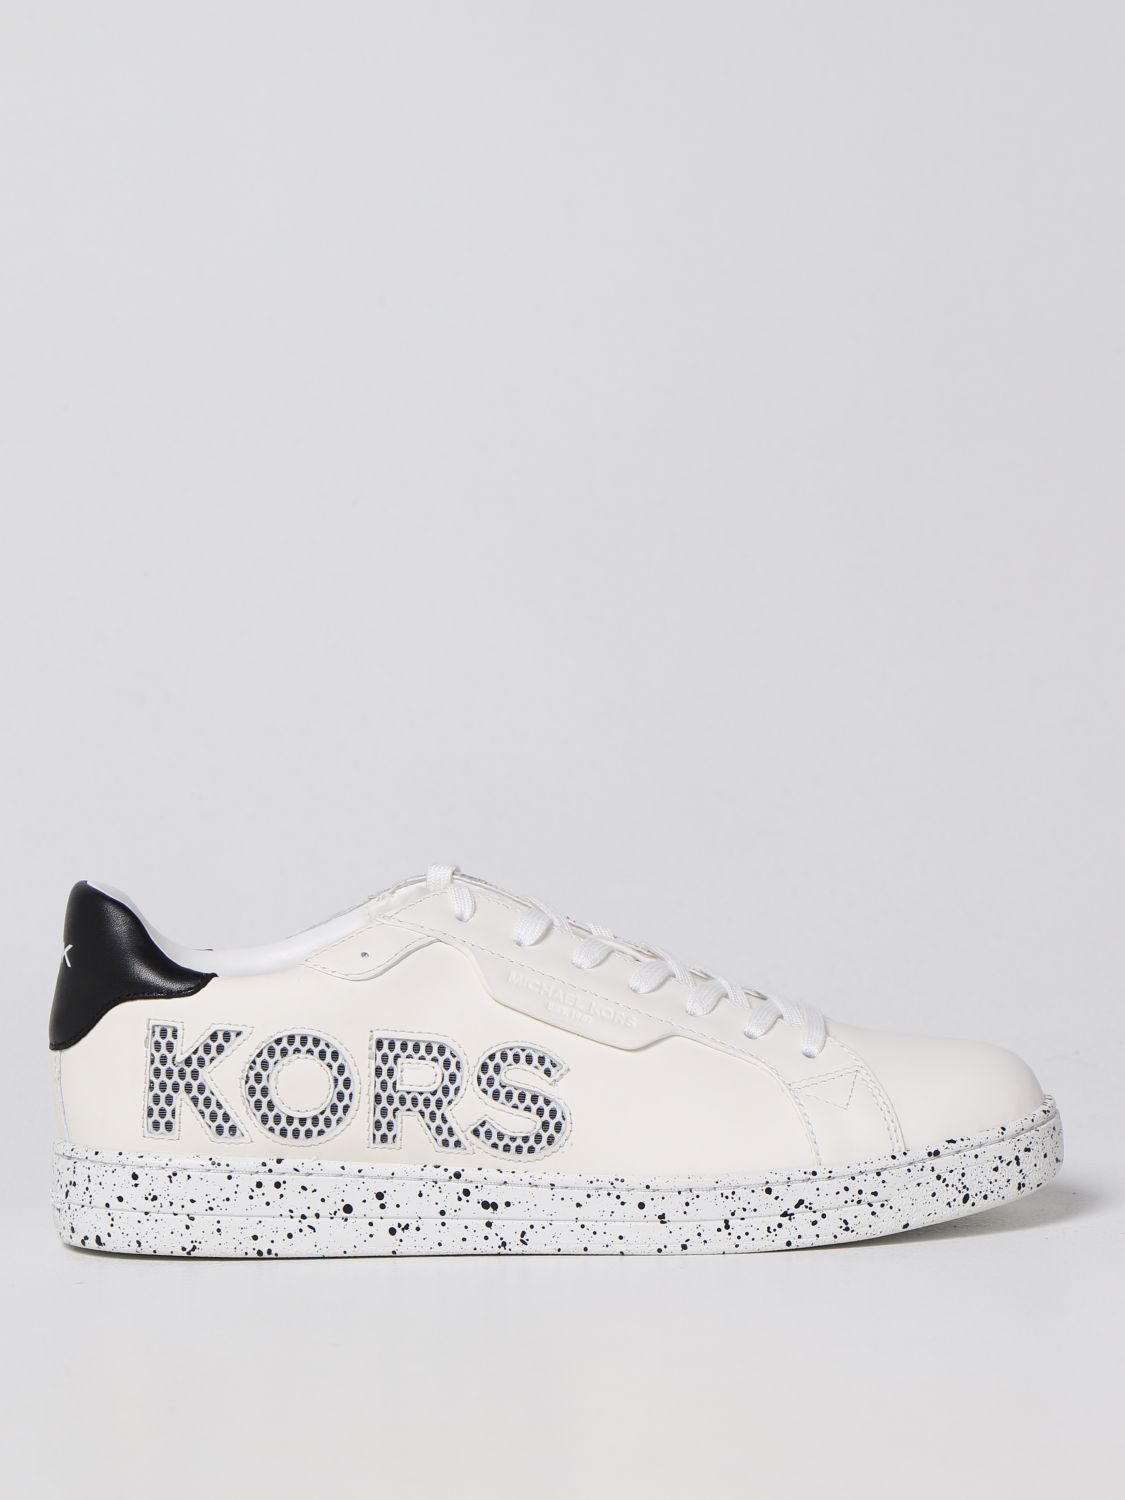 Michael Kors Outlet sneakers for man  White  Michael Kors sneakers  42F2KEFS5L online on GIGLIOCOM